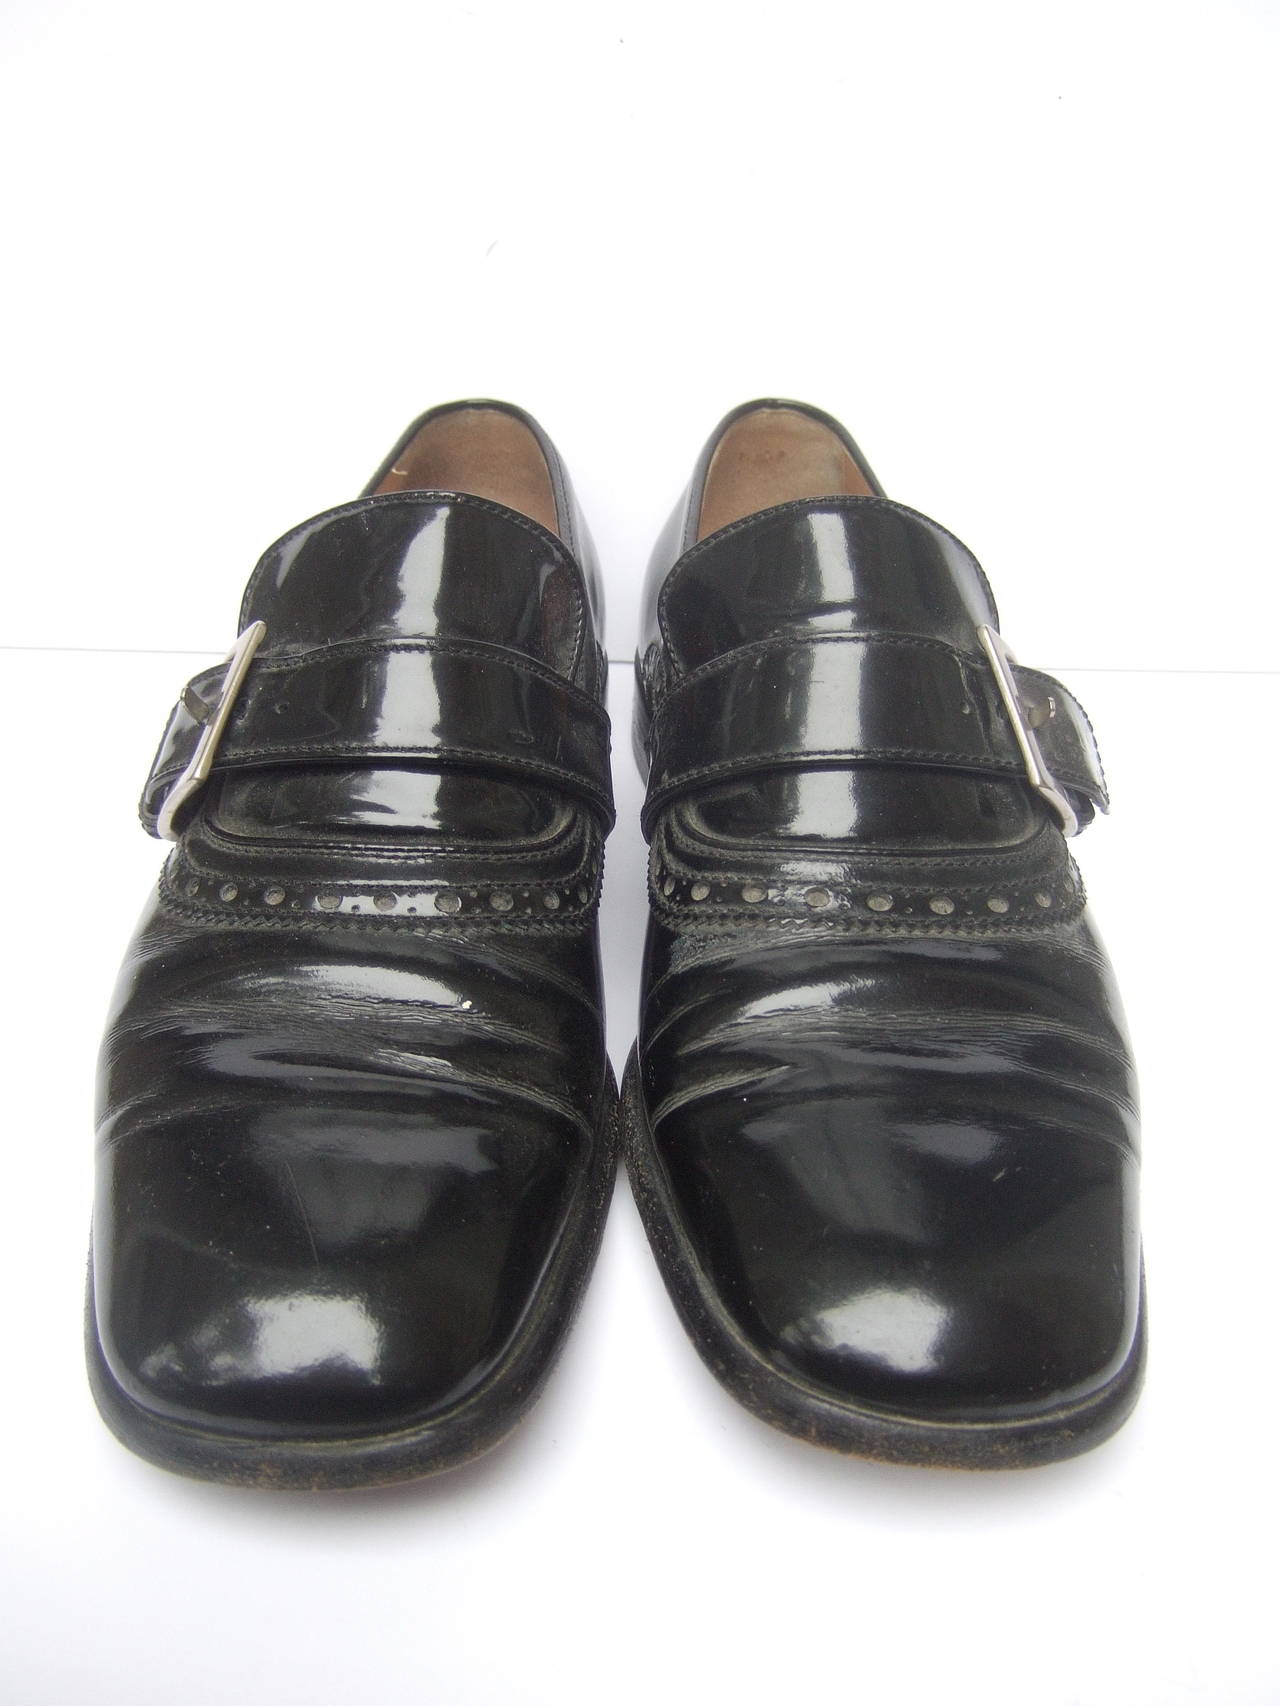 dolce and gabbana mens dress shoes